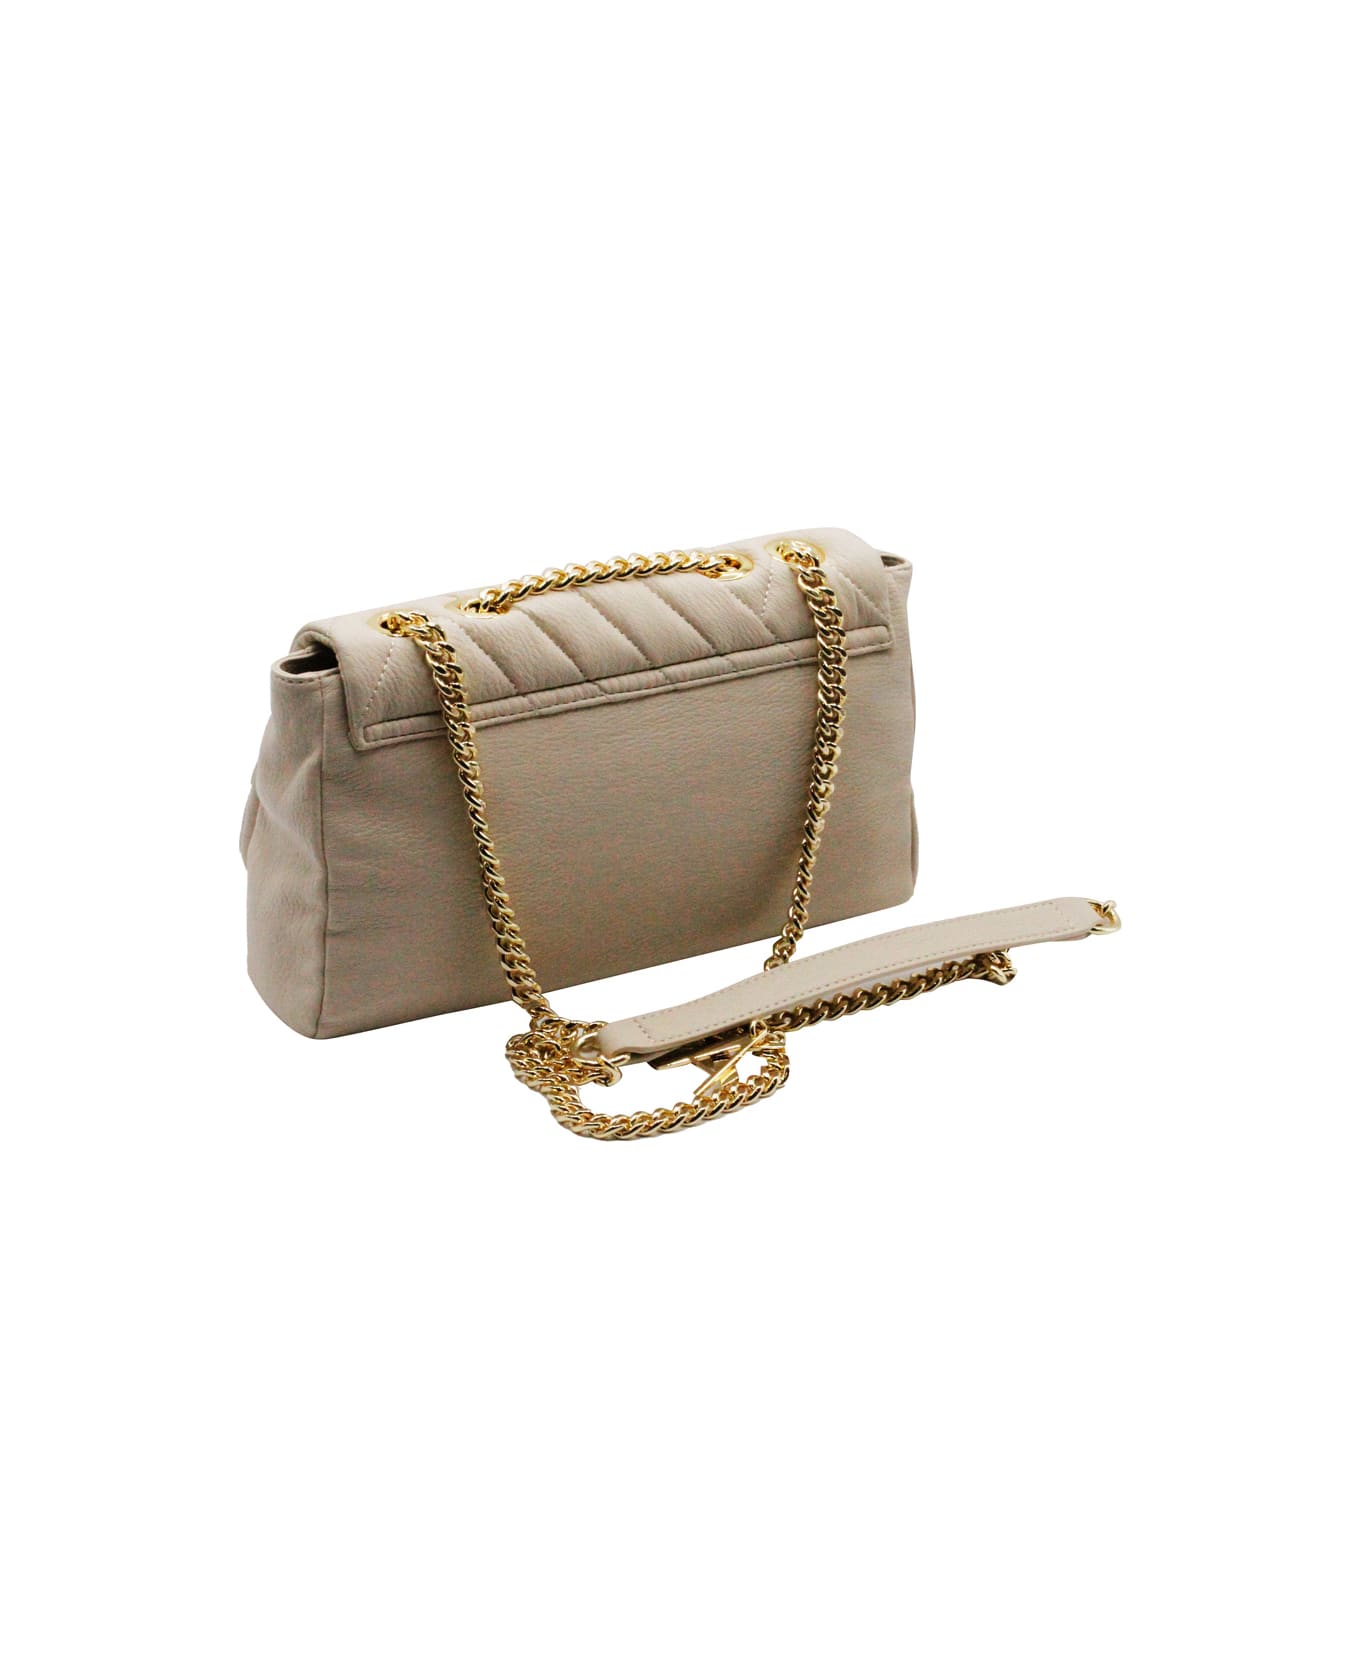 Armani Collezioni Crossbody Bag Made Of Soft Matelassé Faux Leather With Flap And Button Closure And Front Logo. Internal Pockets. - Beige